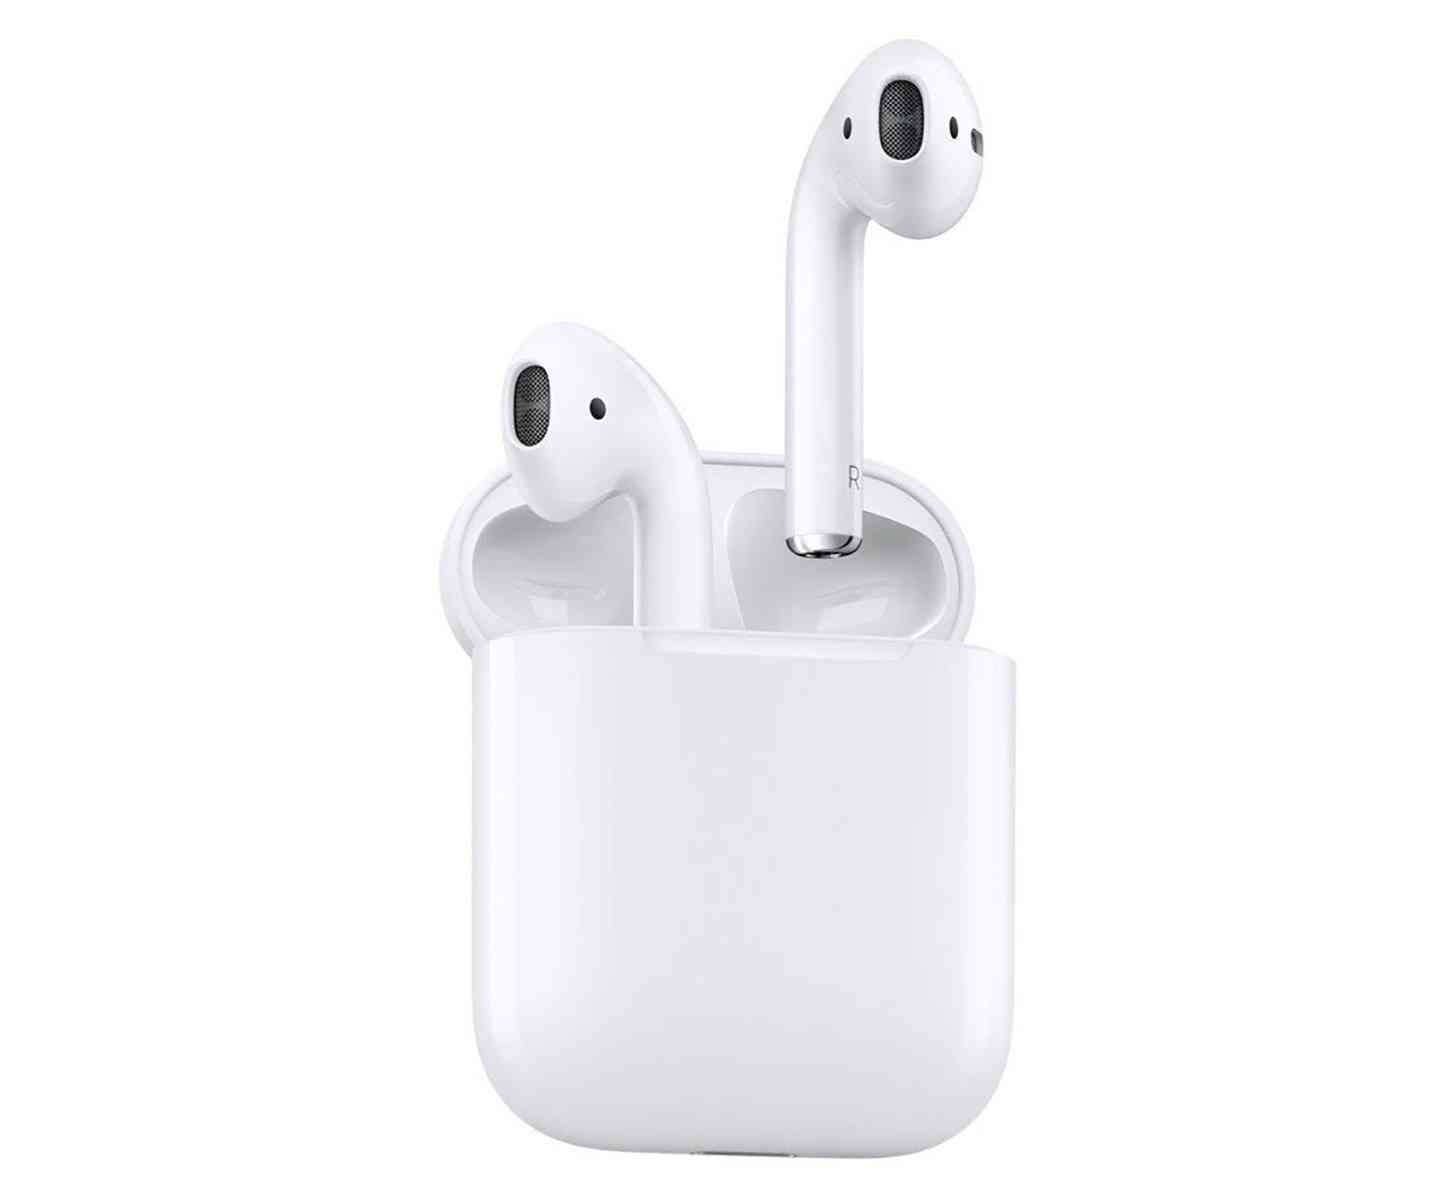 Apple AirPods official